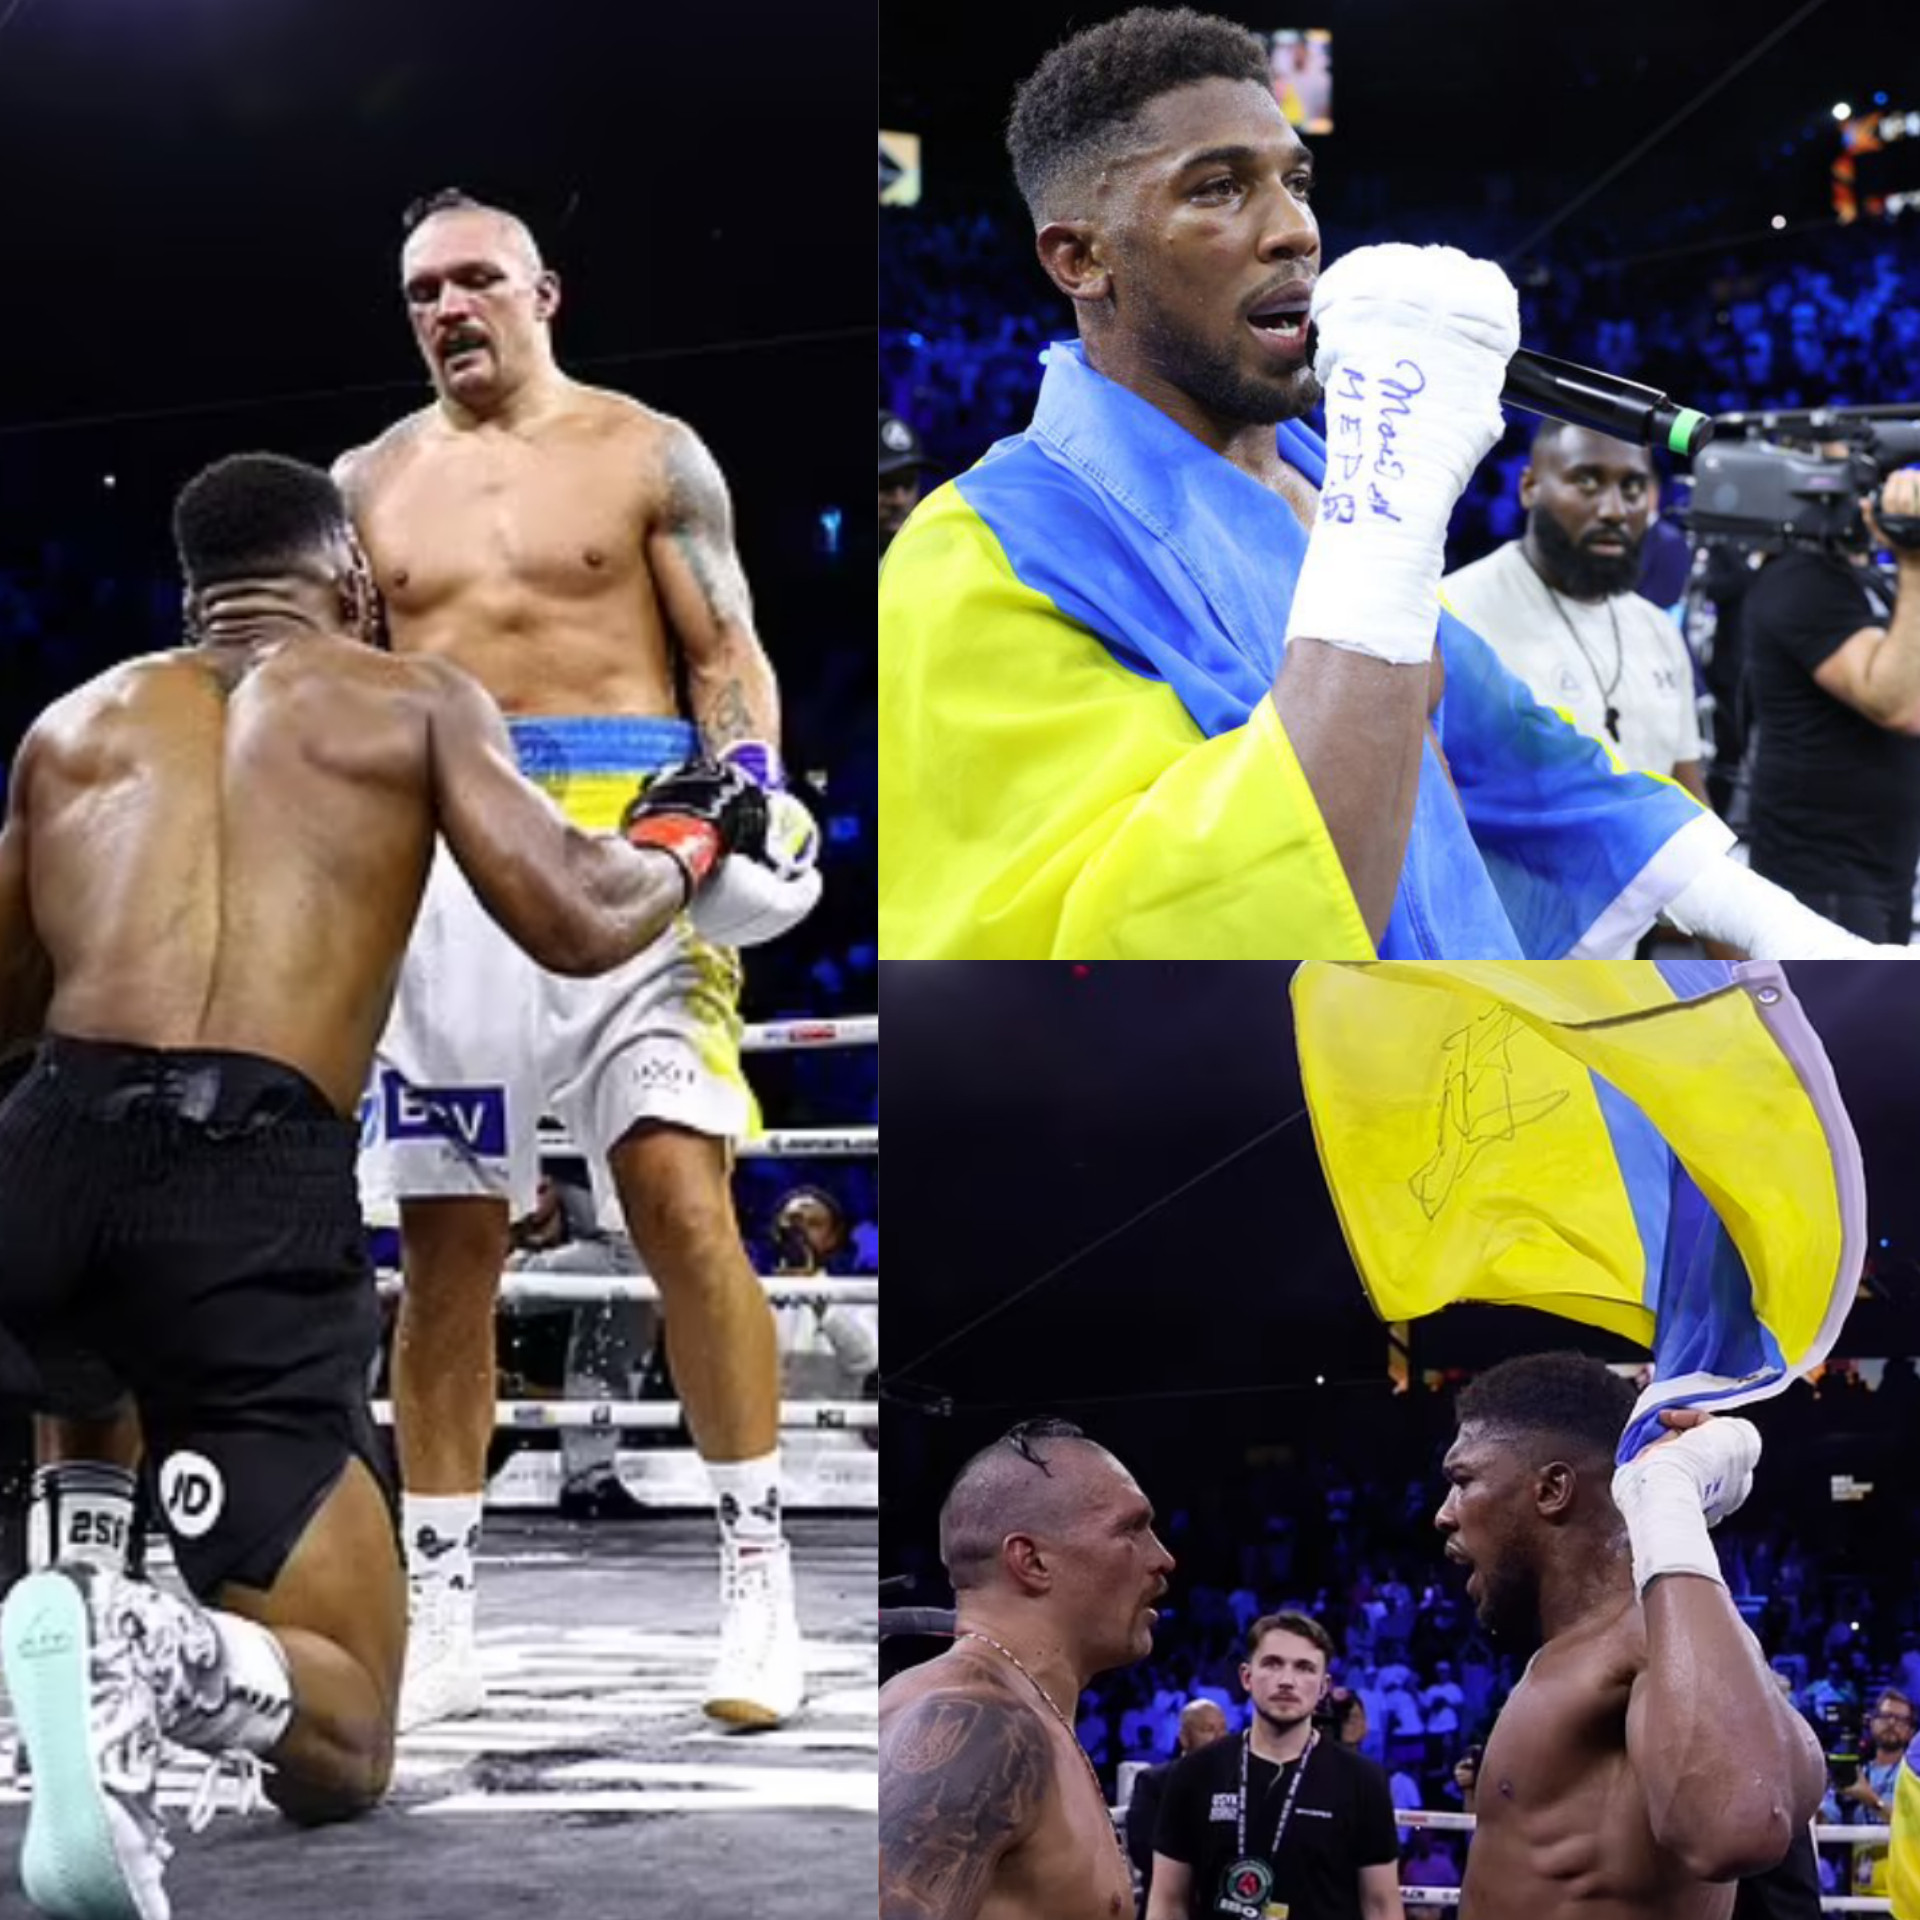 You are not strong how did you beat me? - Anthony Joshua asks Oleksandr Usyk after defeat, throws belts out of ring before delivering rambling speech (videos)